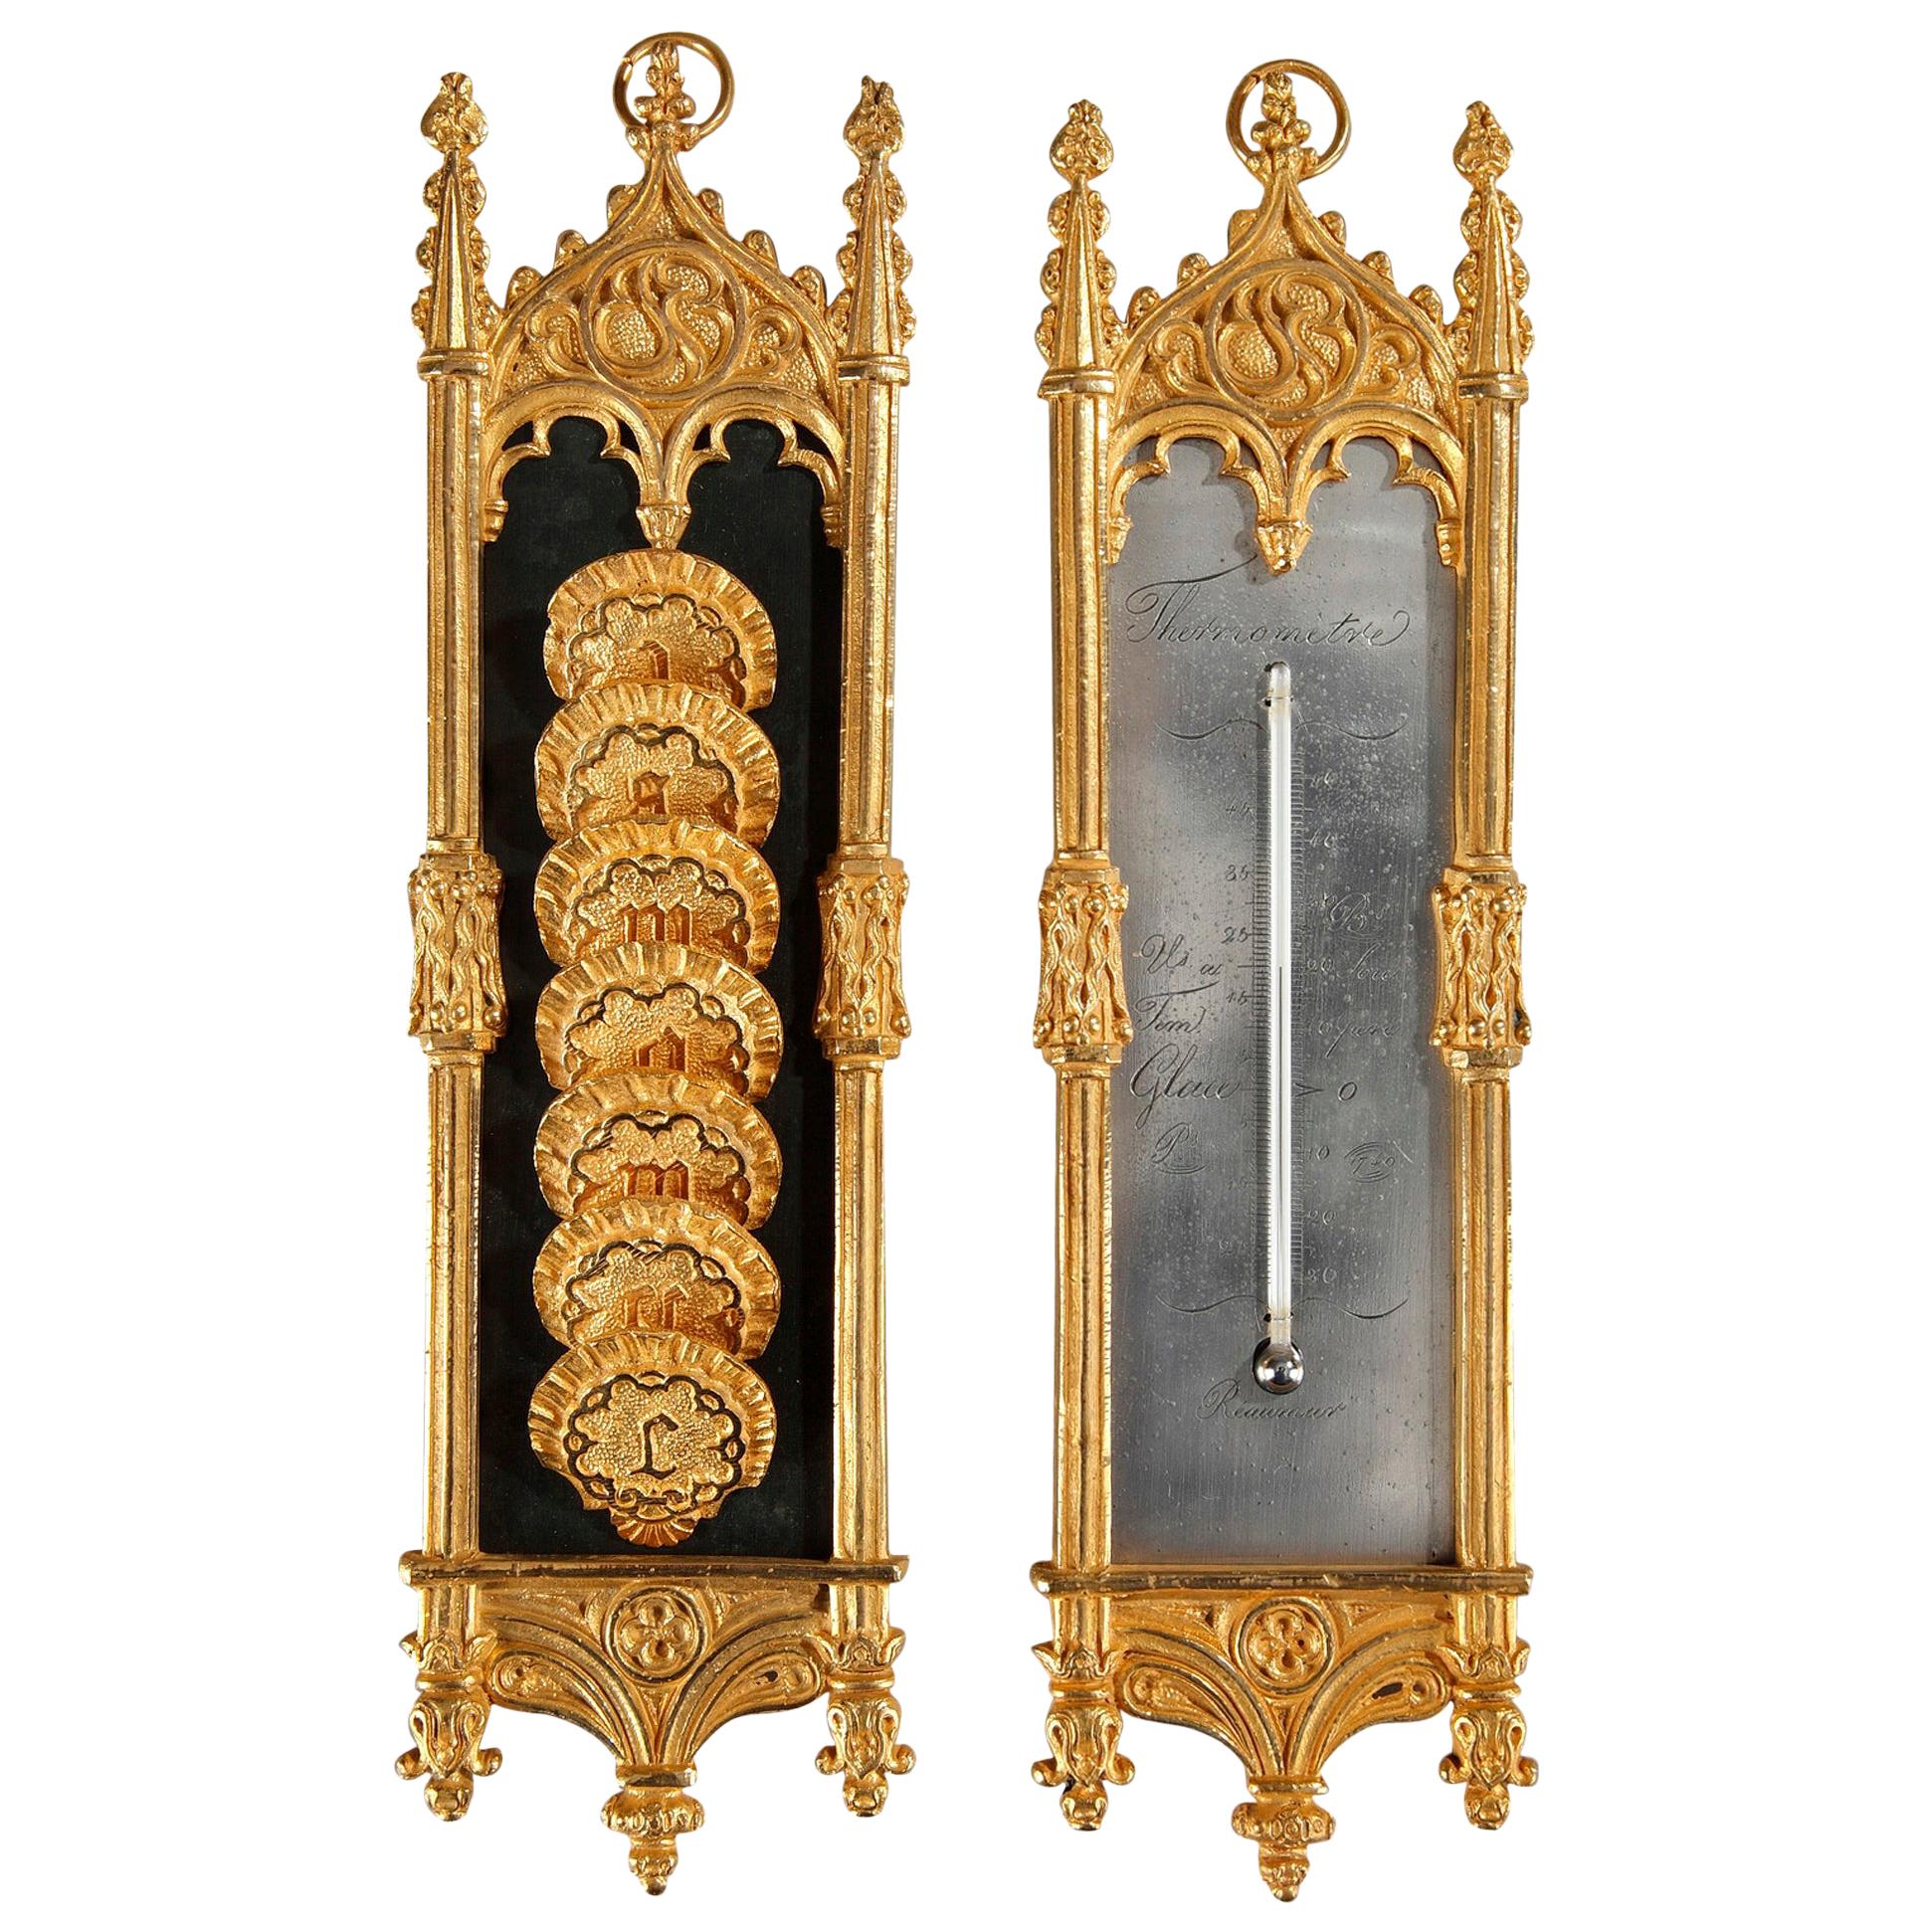 Early 19th Century Restauration Thermometer and Semainier